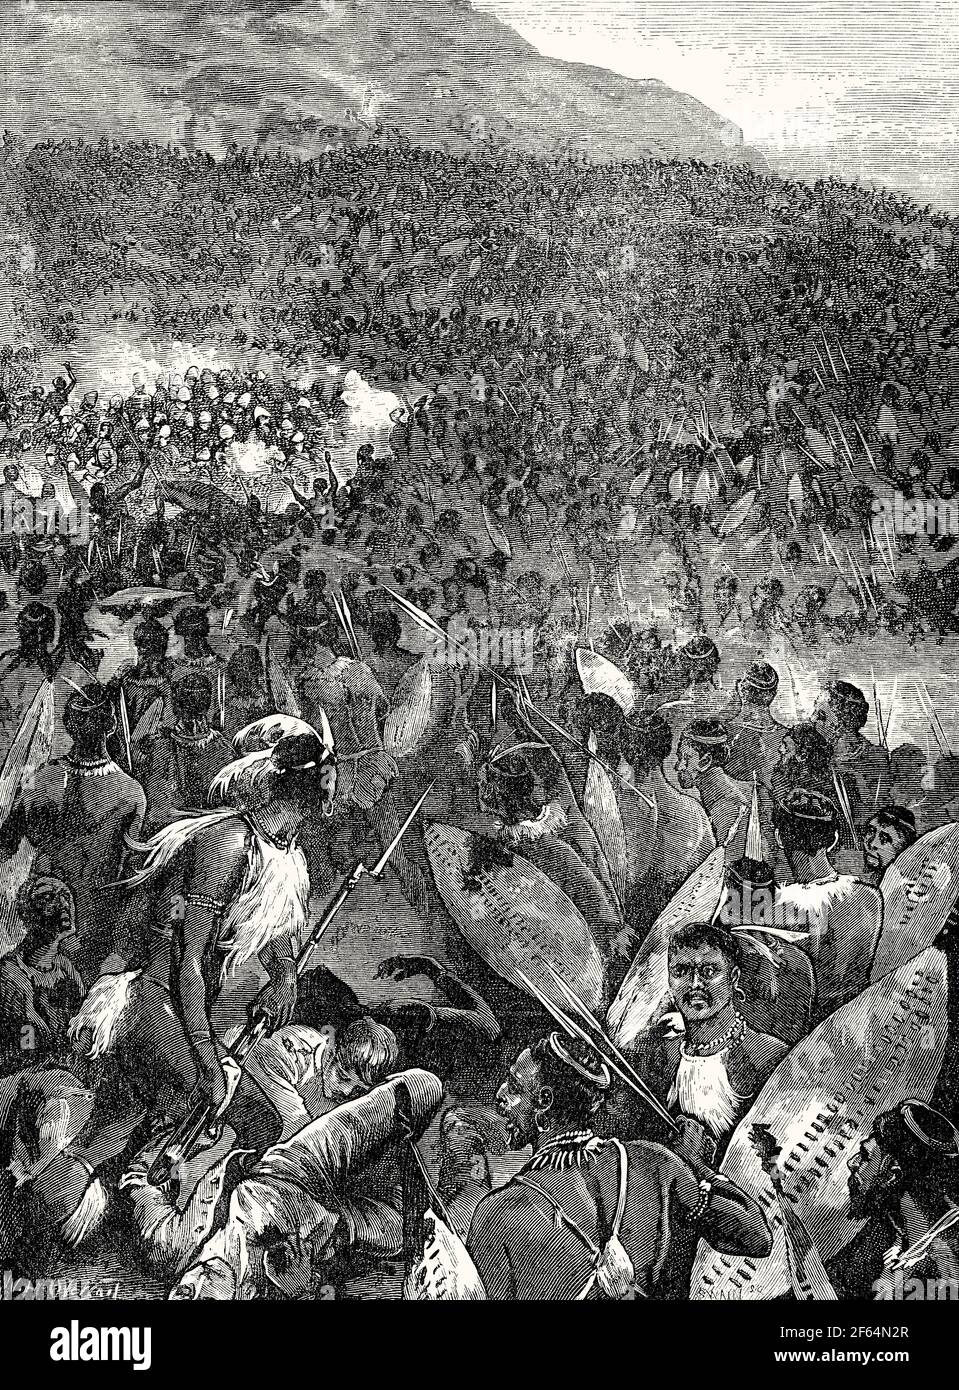 Guerriers Zulu, bataille d'Isandlwana, guerre Anglo-Zulu le 22 janvier 1879 Banque D'Images